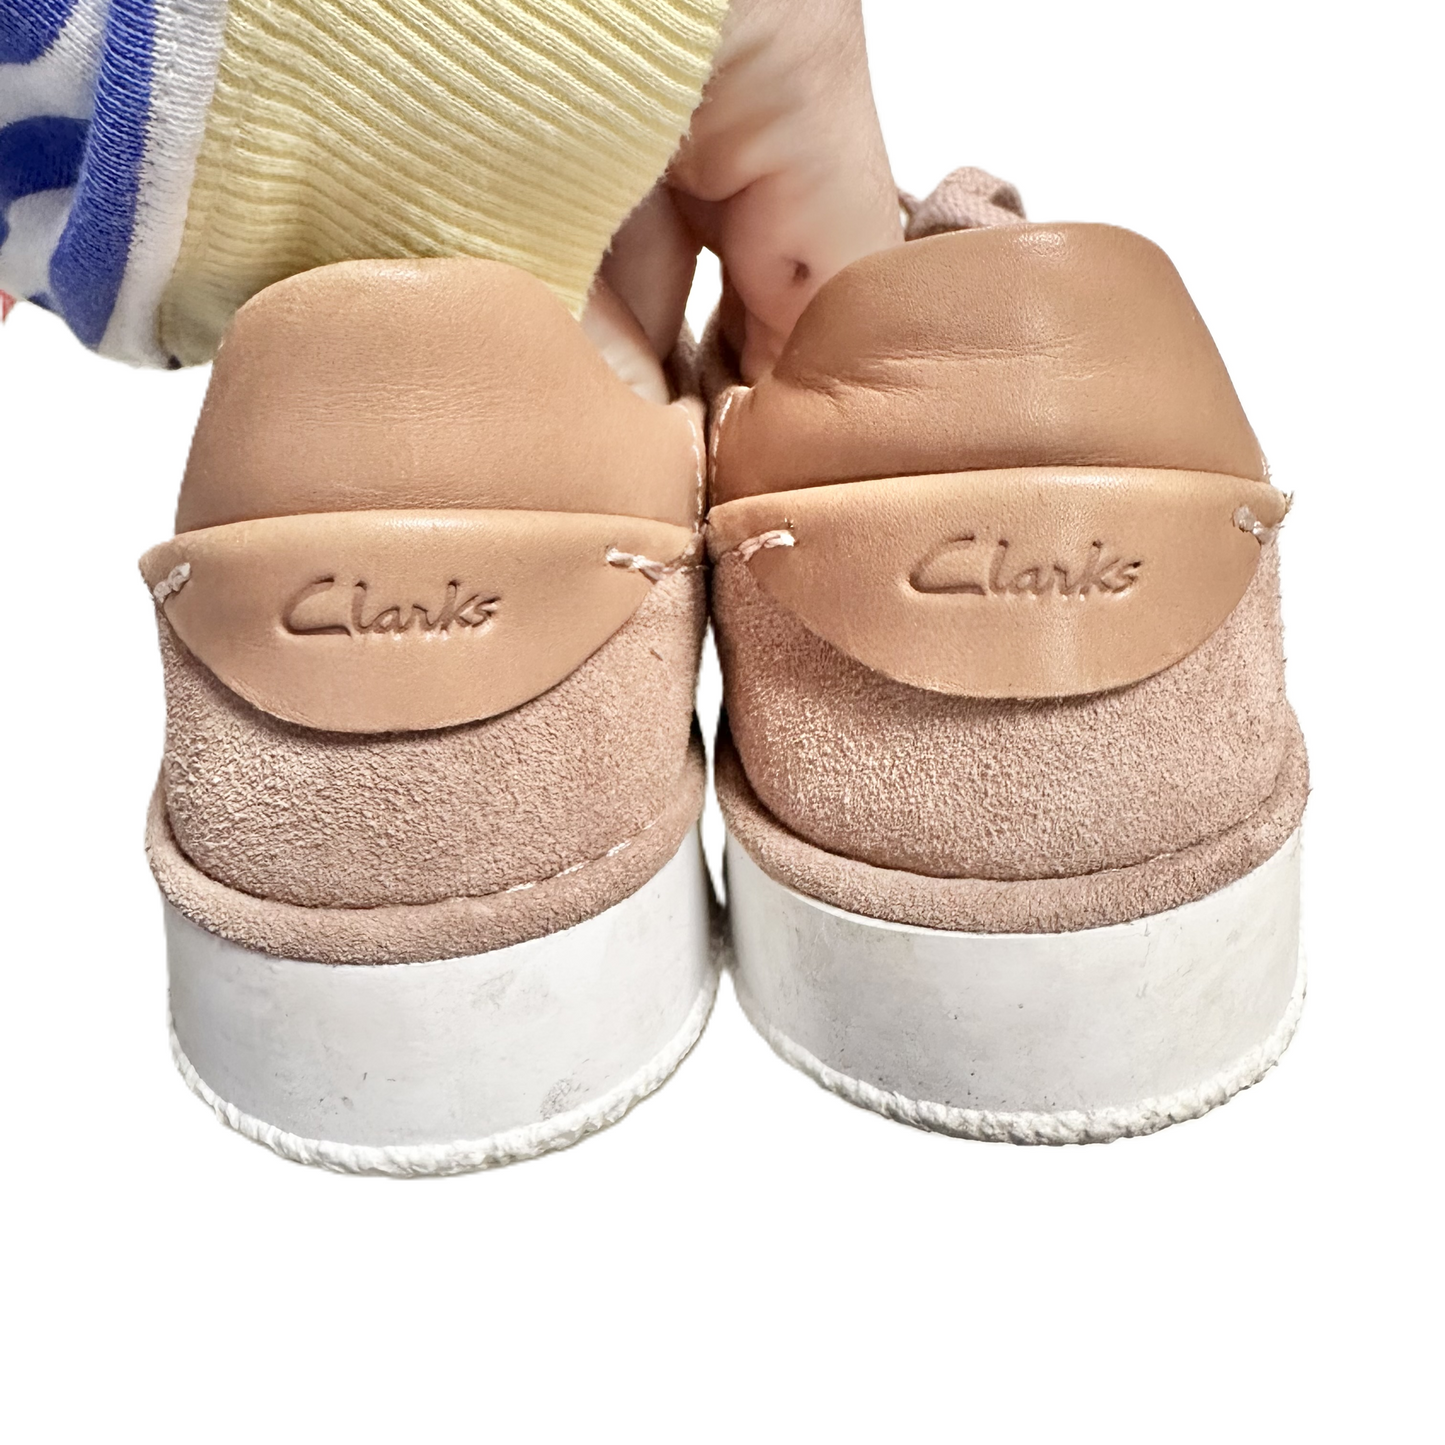 Shoes Sneakers By Clarks  Size: 9.5